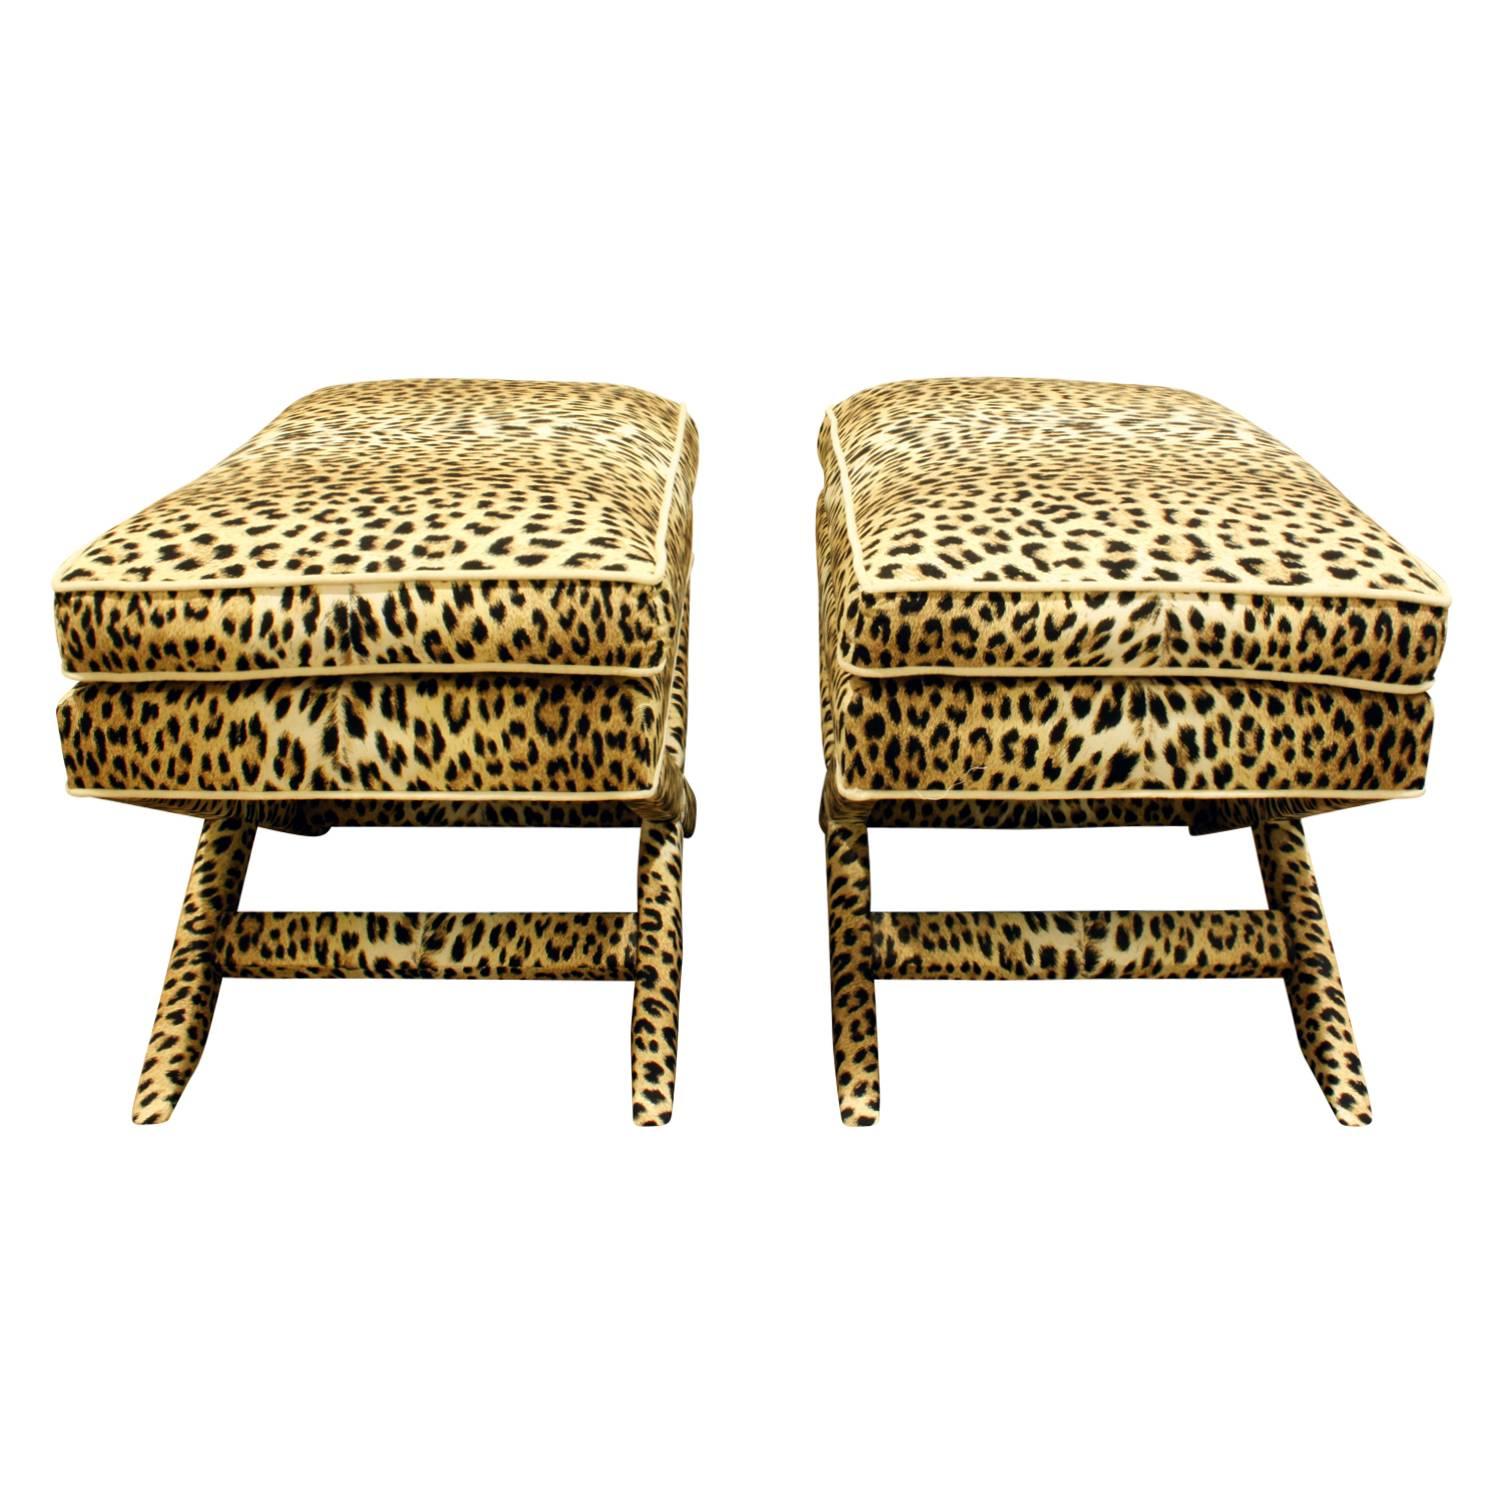 Mid-Century Modern Pair of X-Benches in Leopard Print Fabric, 1970s